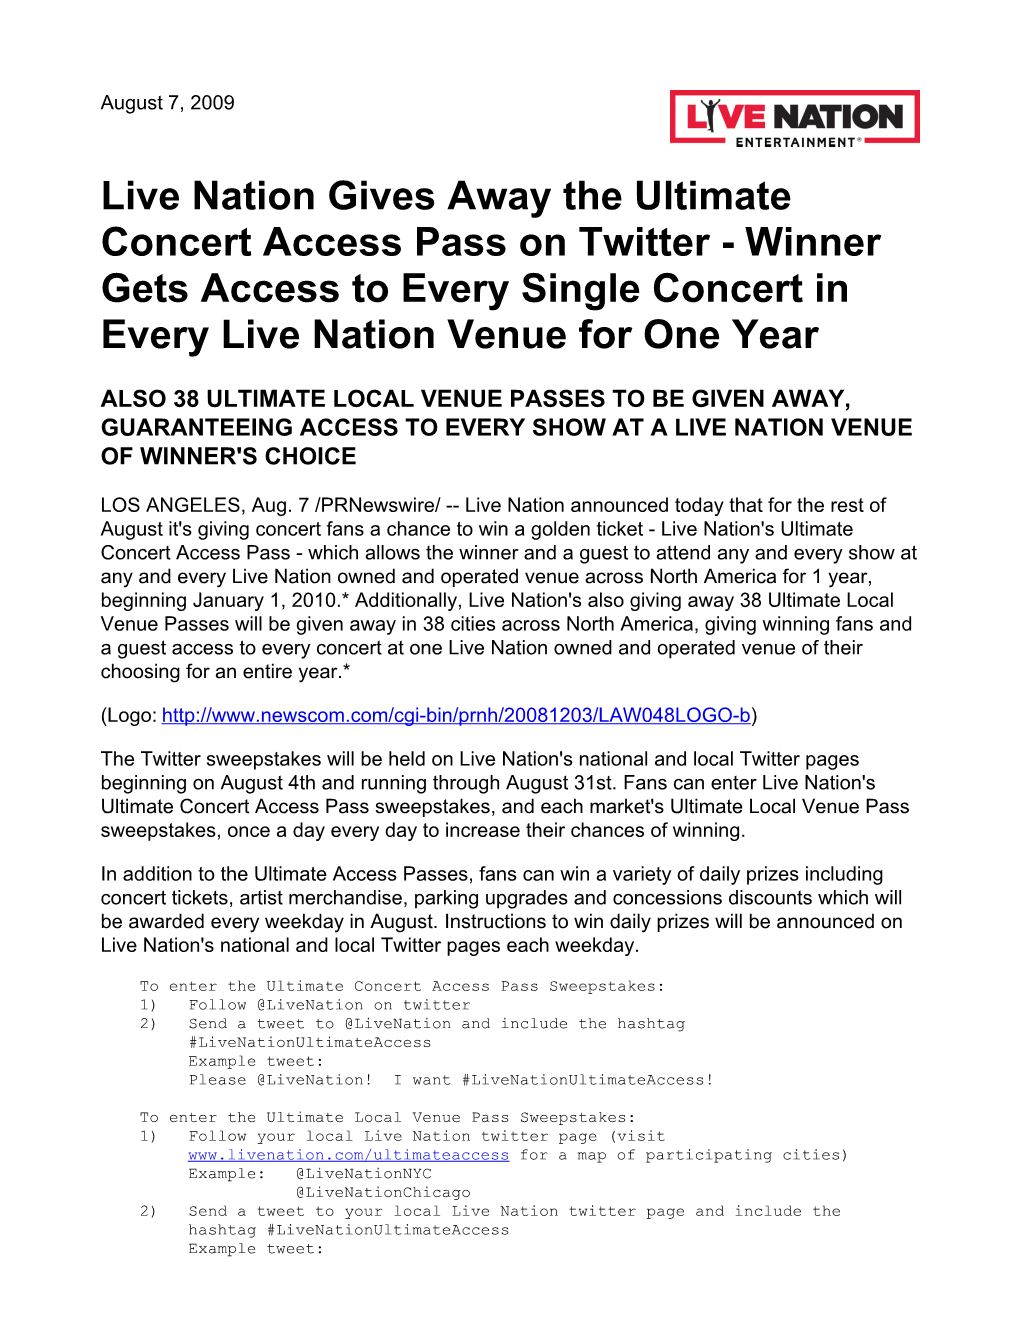 Live Nation Gives Away the Ultimate Concert Access Pass on Twitter - Winner Gets Access to Every Single Concert in Every Live Nation Venue for One Year